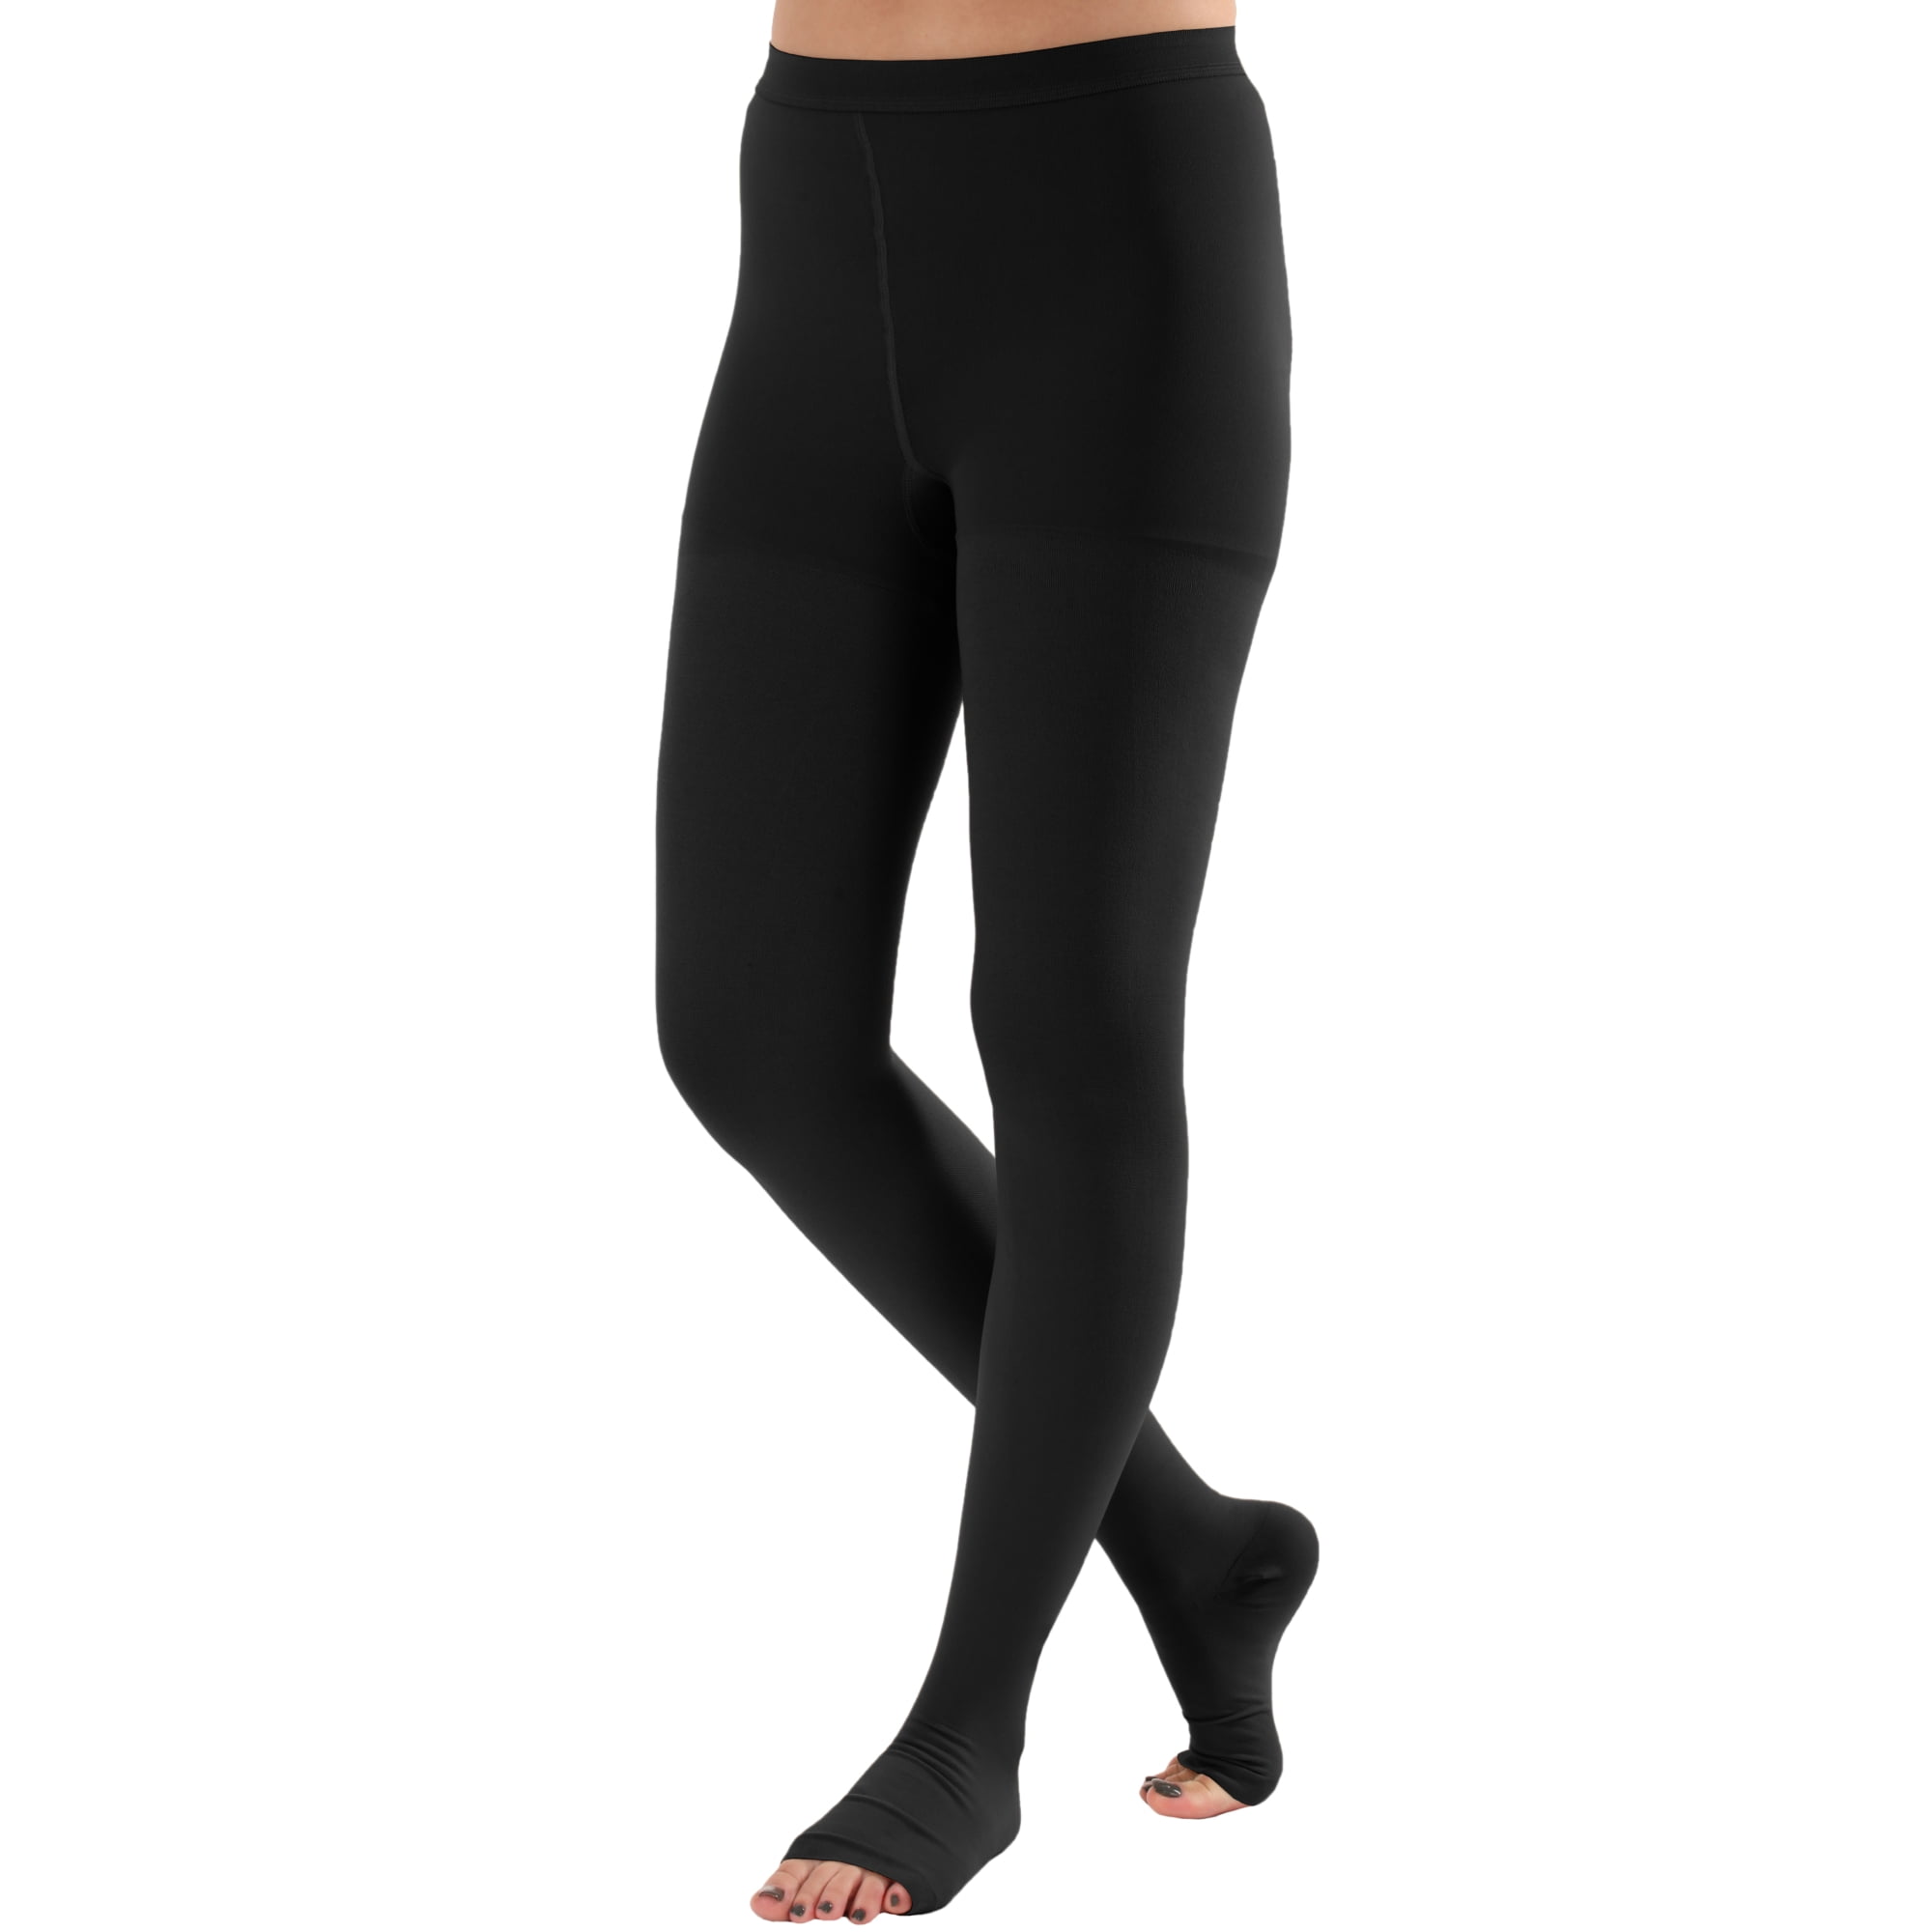 Plus Size Compression Tights for Women Circulation 20-30mmHg - Black, 2X- Large 